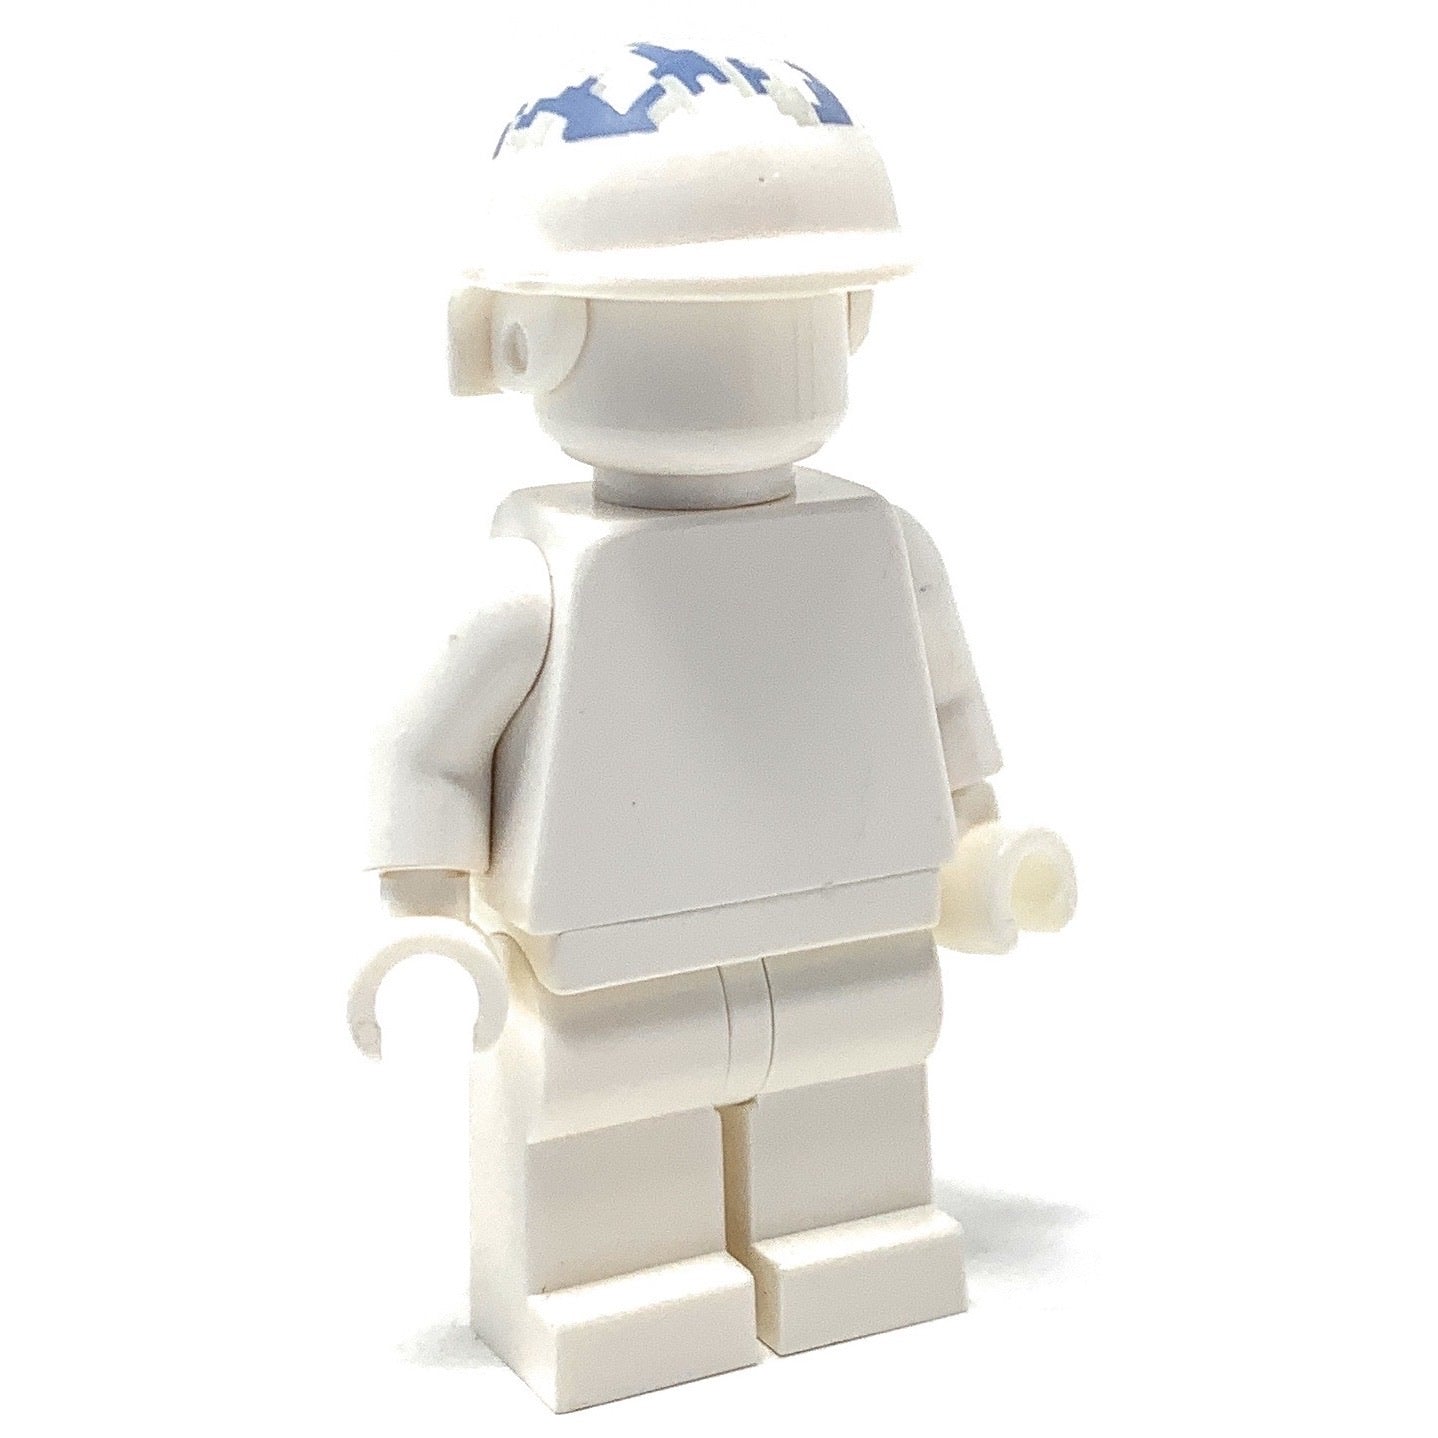 Arctic White Camouflage Tactical Helmet - BrickForge Part for LEGO Minifigures